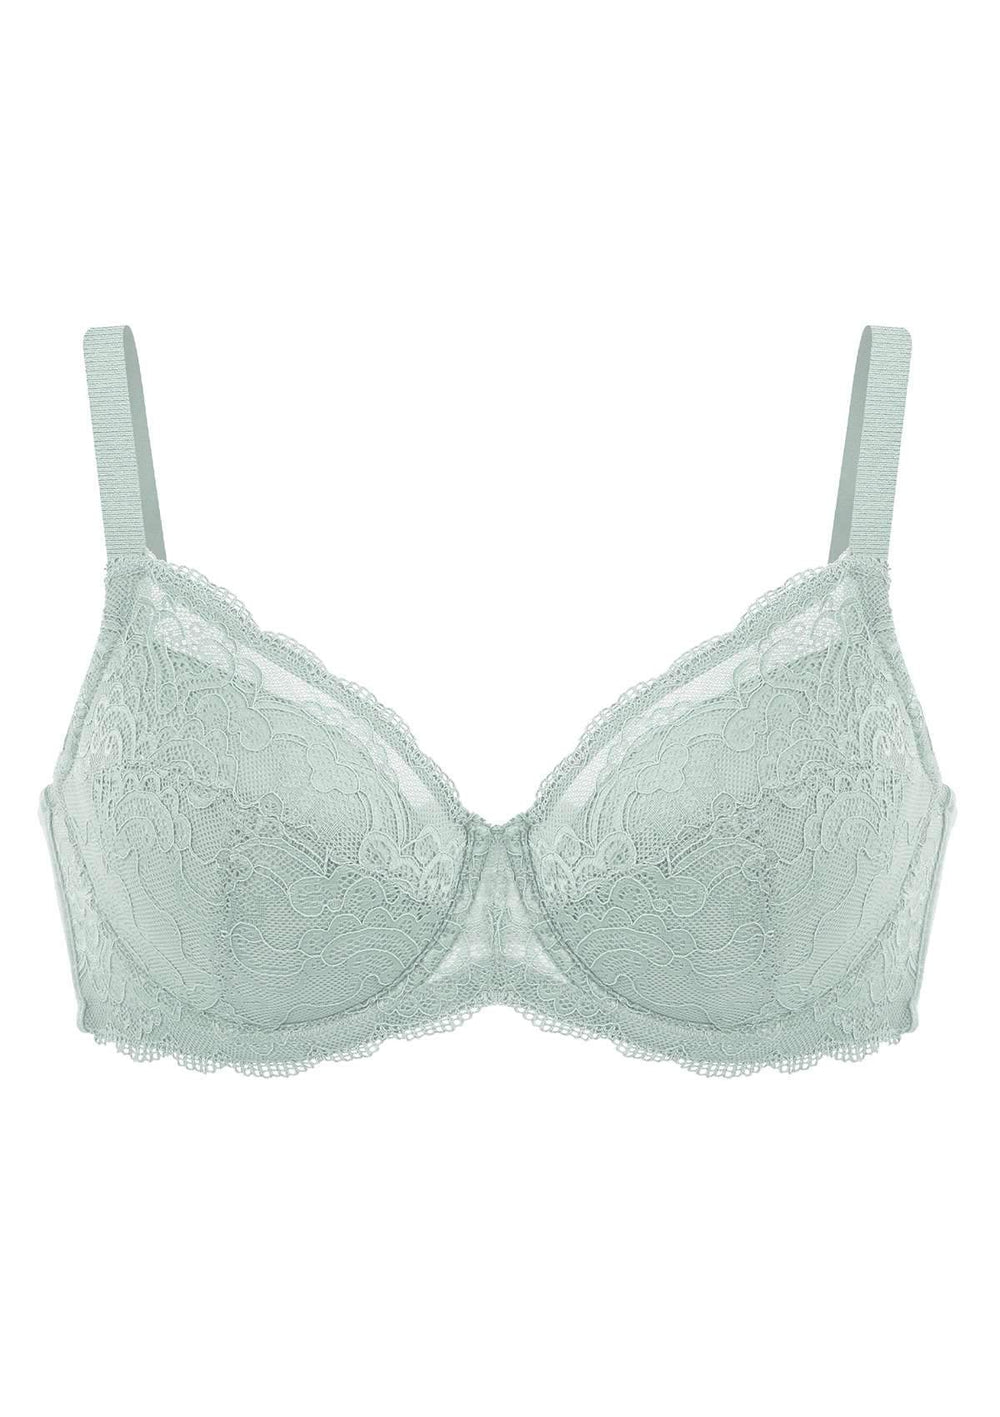 HSIA Lightly Padded Full Figure Full Suppport Lace Bra